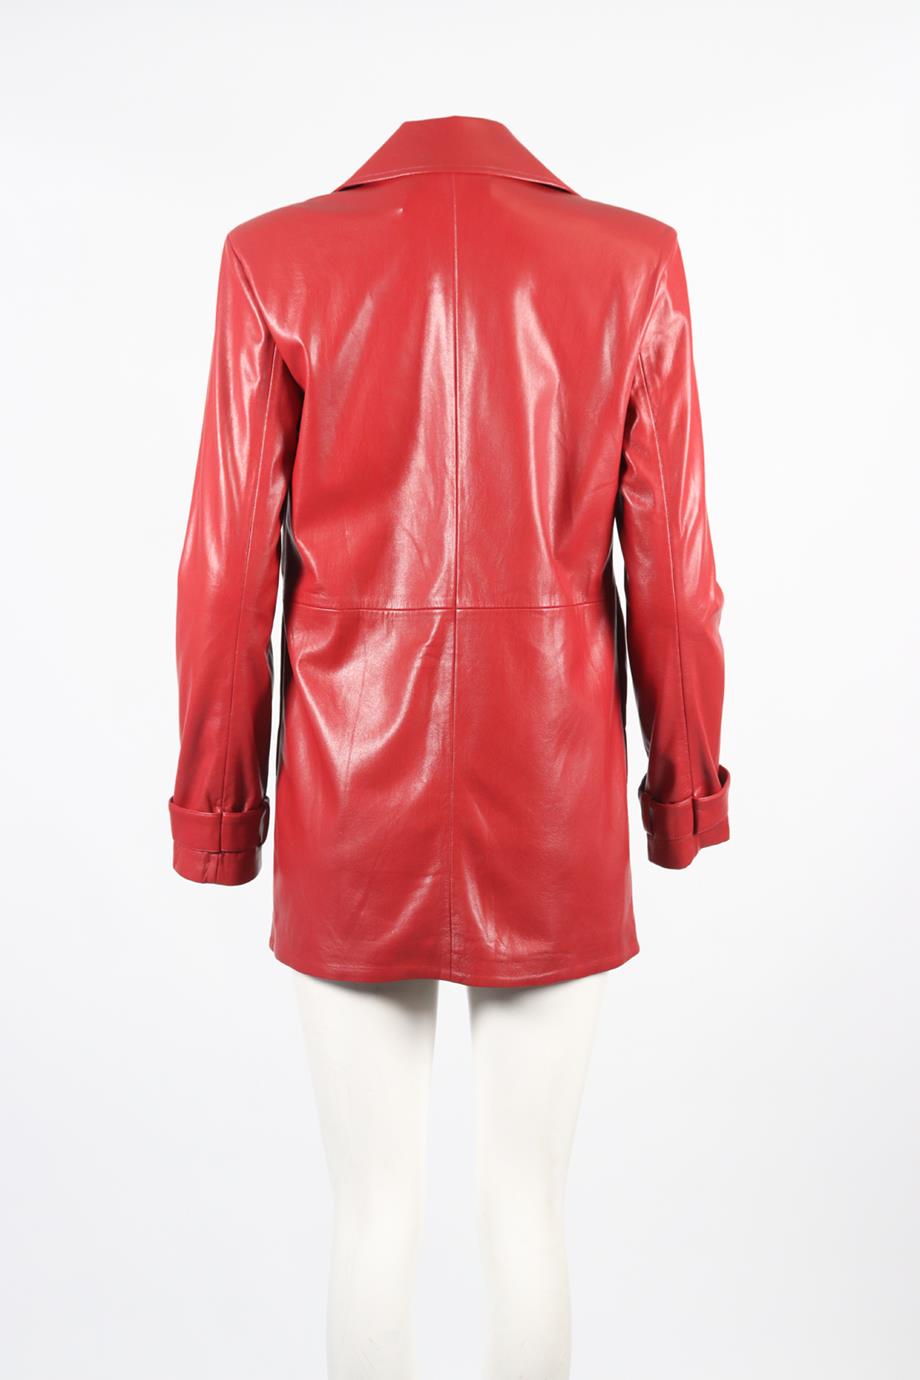 HOUSE OF HARLOW 1960 FAUX LEATHER BLAZER XSMALL